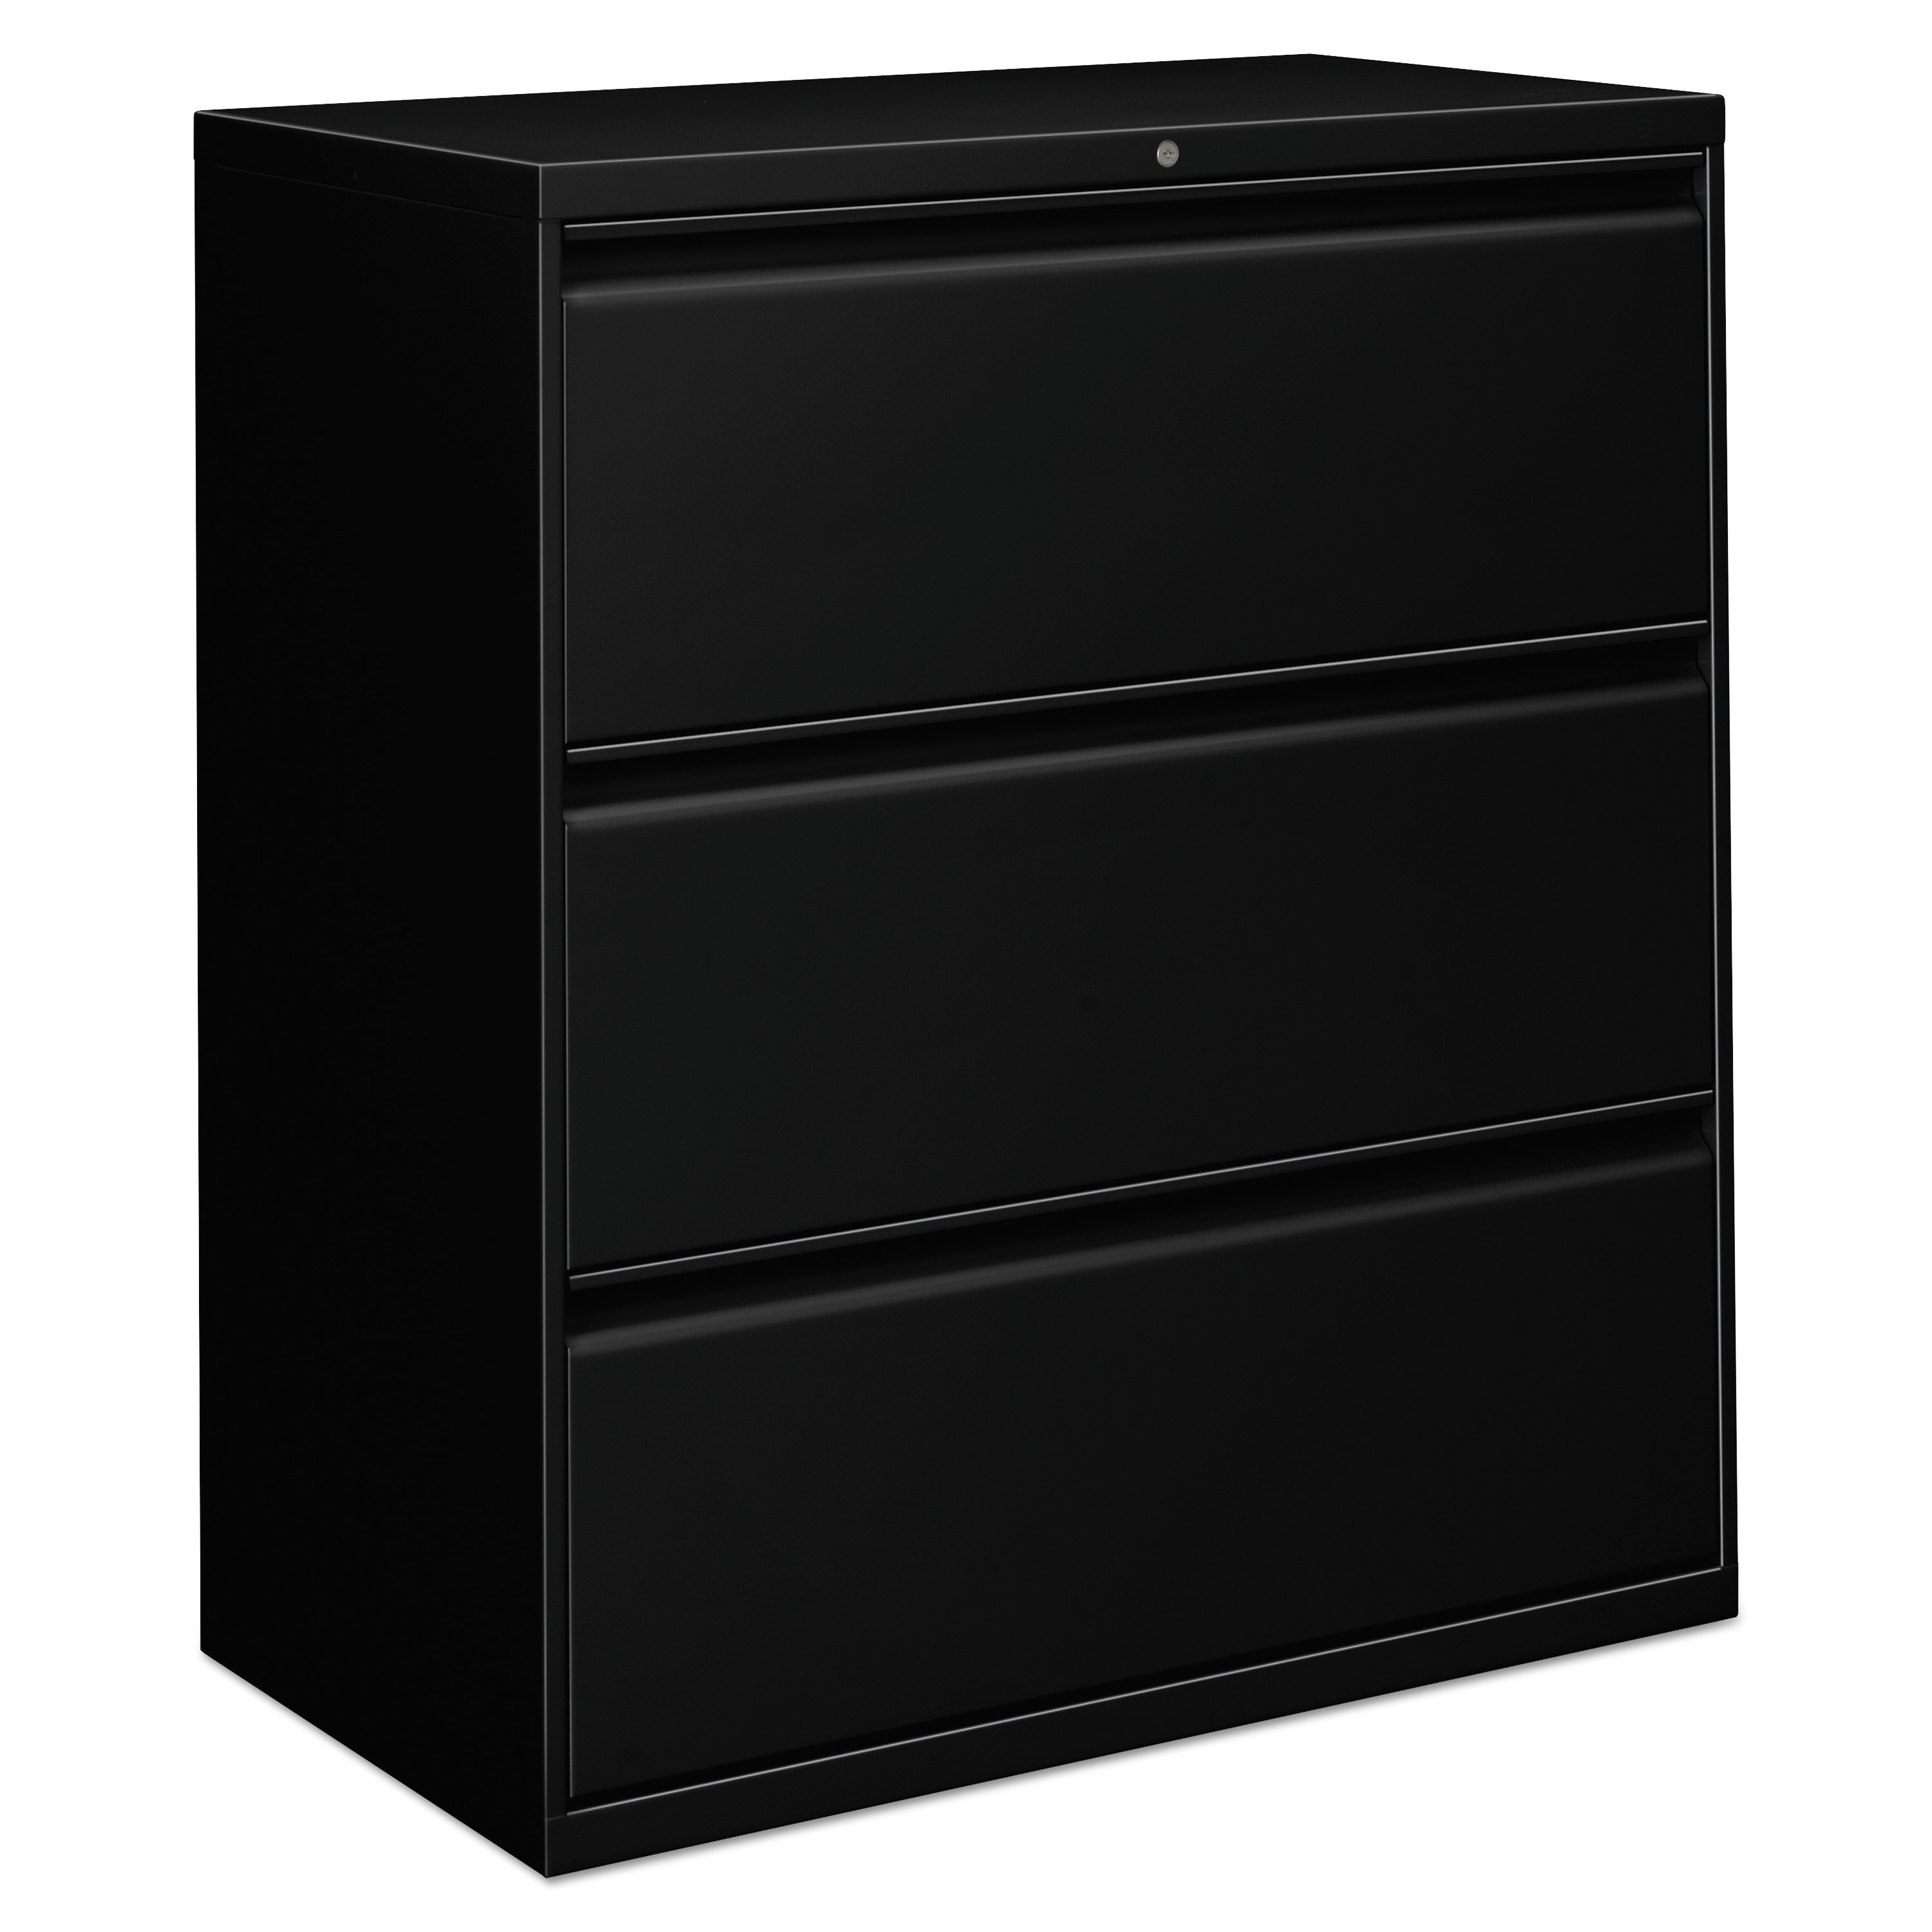 Three-Drawer Lateral File Cabinet, 36w x 18d x 39 1/2h, Black